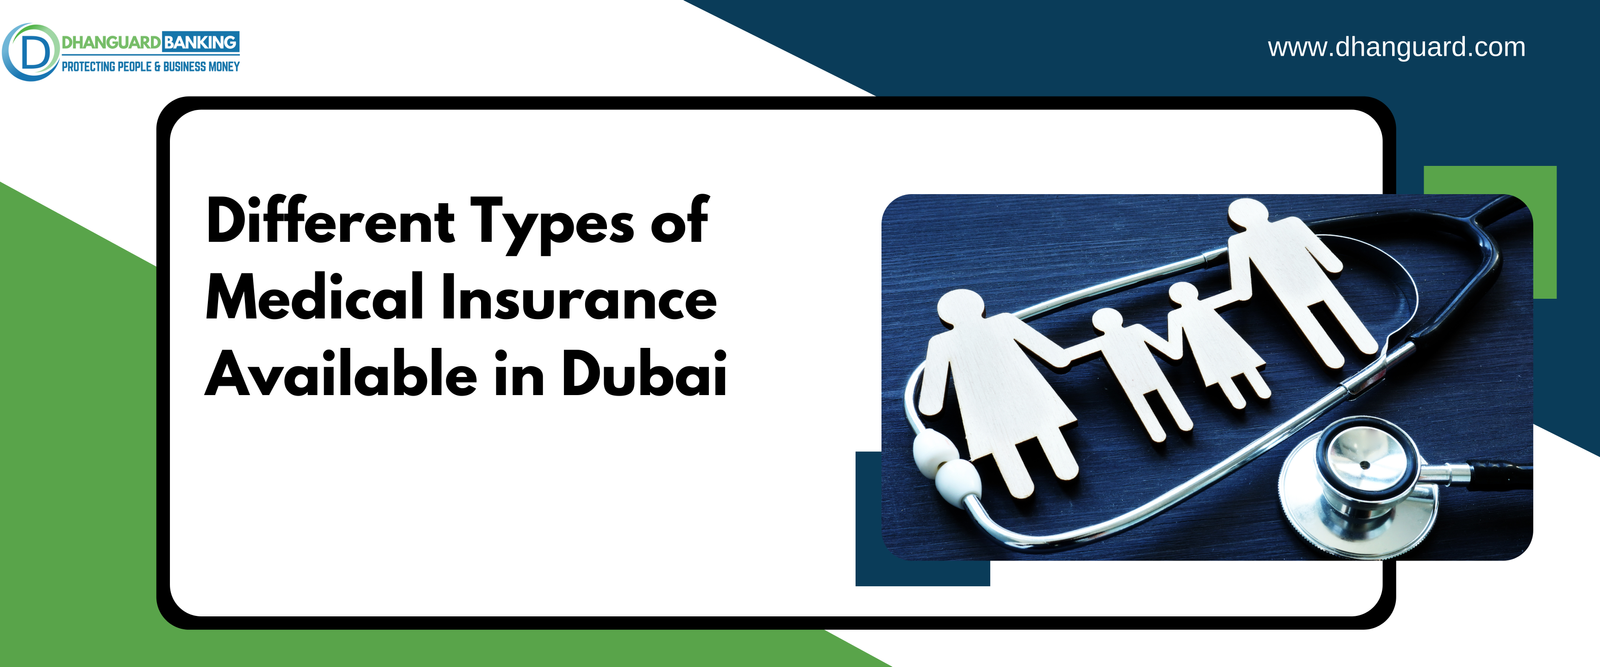 Different Types of Medical Insurance Available in Dubai